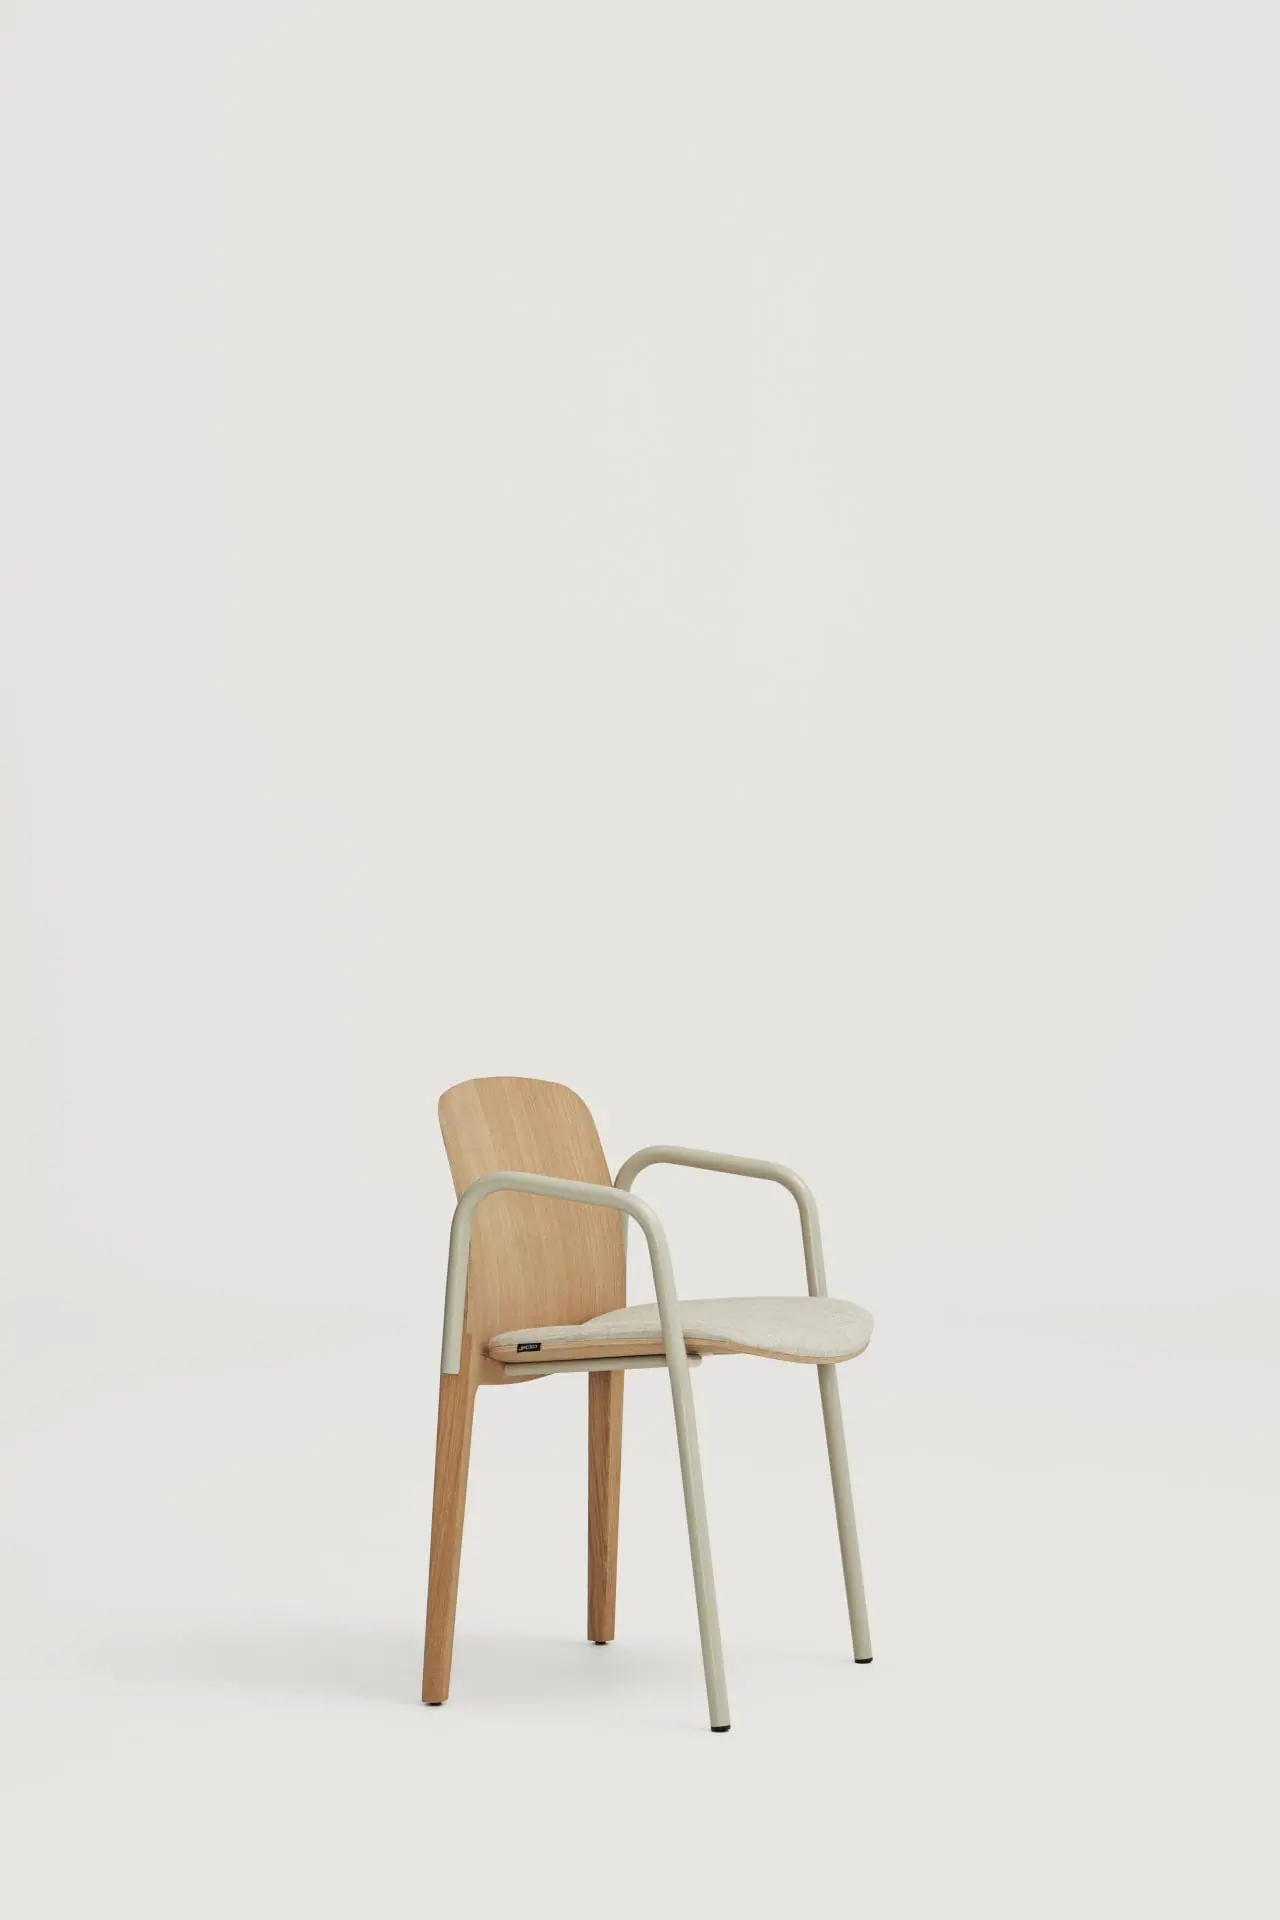 capdell-match-chair-04